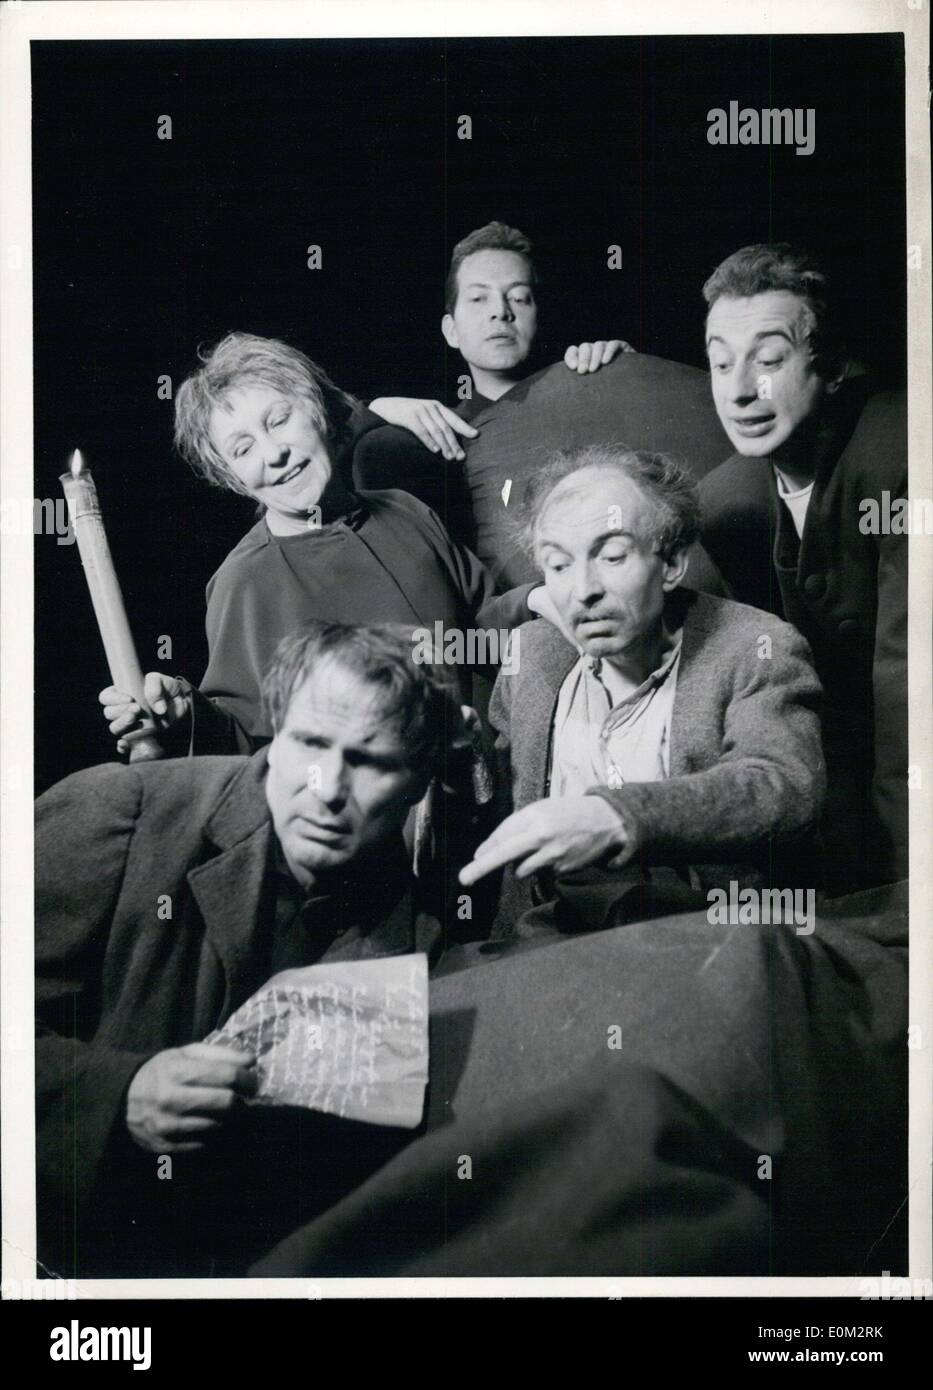 May 11, 1953 - Pictured are: Wilhelm Borchert as ''K.'' Else Ehser as Mizzi. Friedrich Maurer as the church leader. Paul Edwin Roth as Jeremias. Harry Wuestenhagen as Arthur. They were the primary actors in the play based on the Franz Kafka's novel ''Das Schloss. Stock Photo